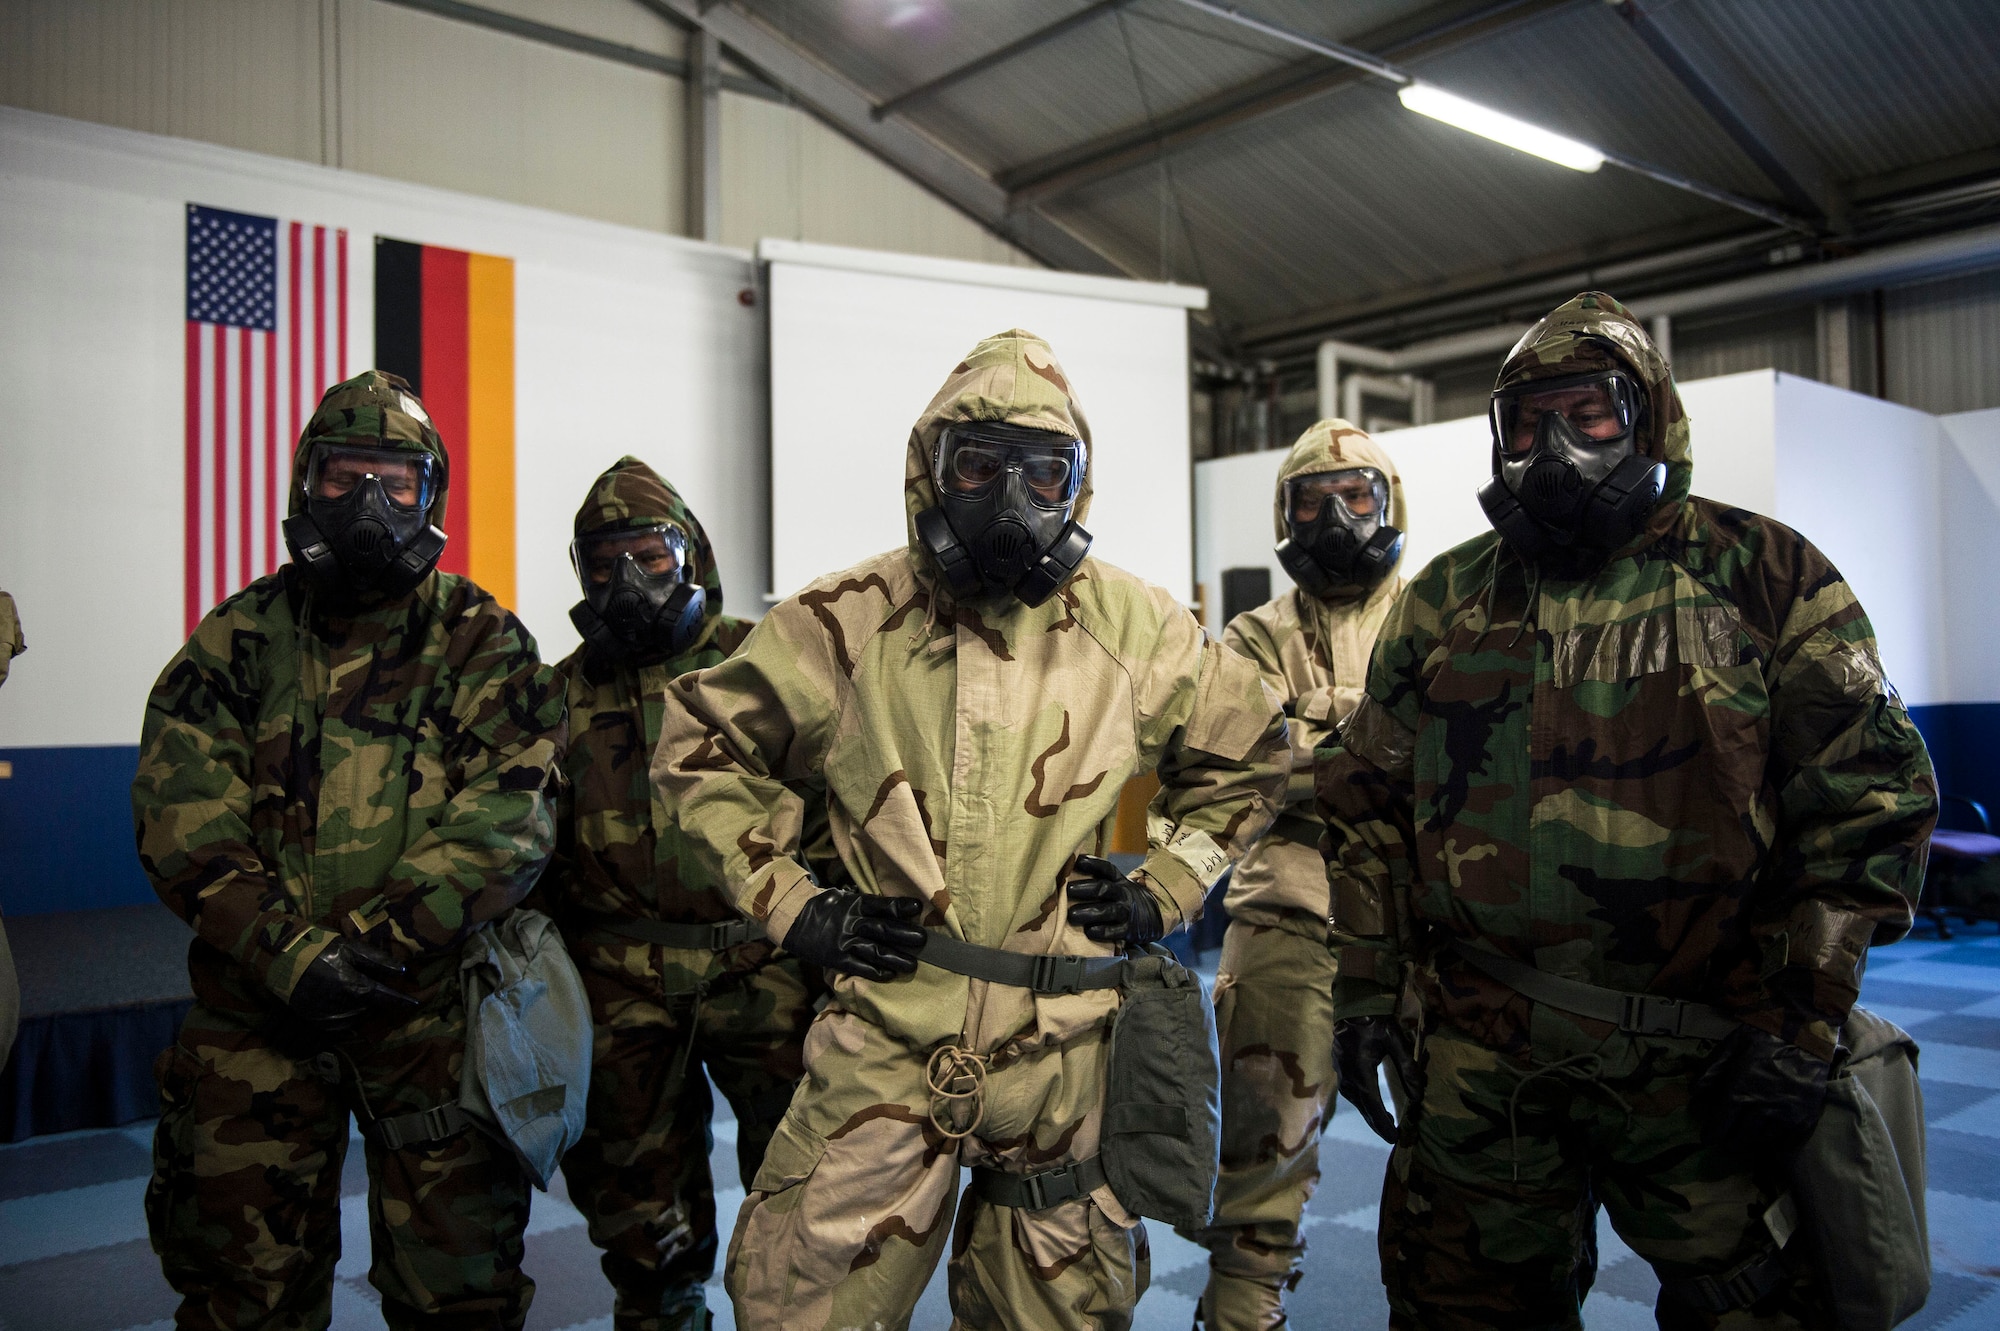 U.S. Airmen assigned to the 86th Civil Engineer Group participate in a chemical, biological, radiological, and nuclear training exercise on Ramstein Air Base, Germany, April 12, 2018. All Airmen are responsible for maintaining ample knowledge of CBRN operations regardless of rank or career field. (U.S. Air Force photo by Senior Airman Joshua Magbanua)